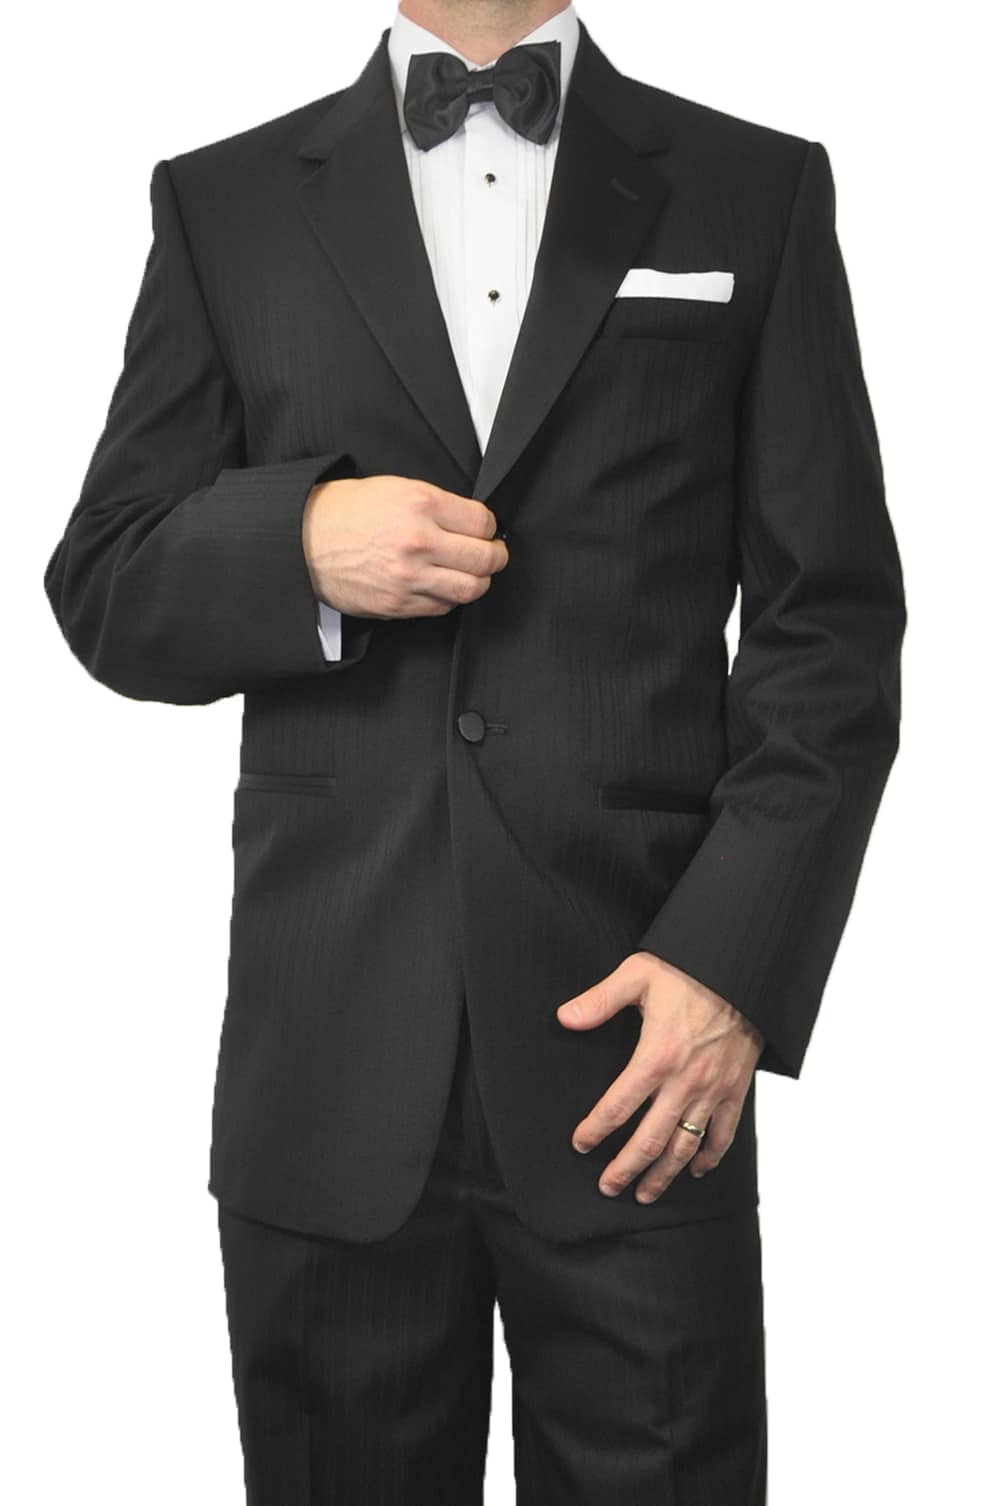 Suit Up the Bond Way at Formal Tailor - tuxedo - suit (3)